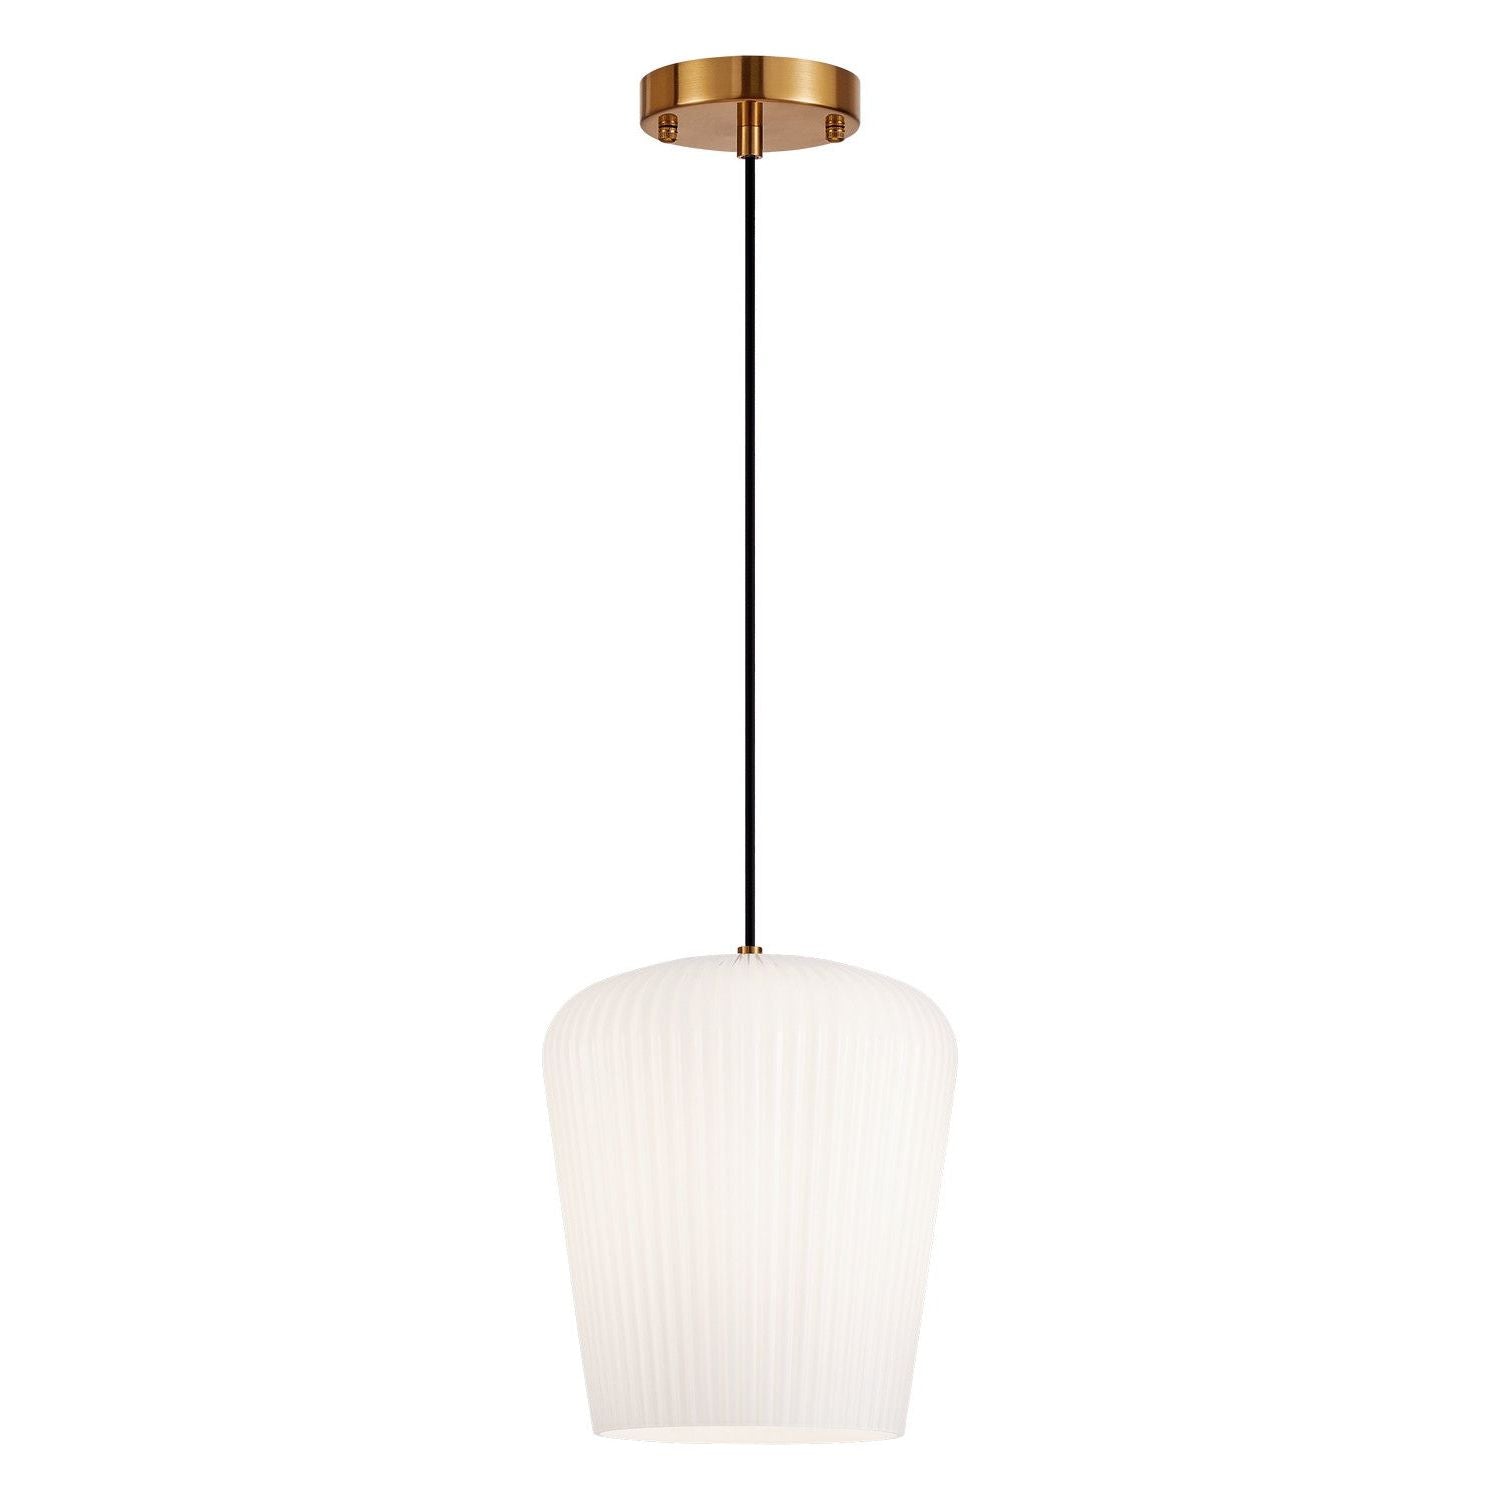 Matteo Canada - C61001AGOP - One Light Pendant - Charismo - Aged Gold Brass